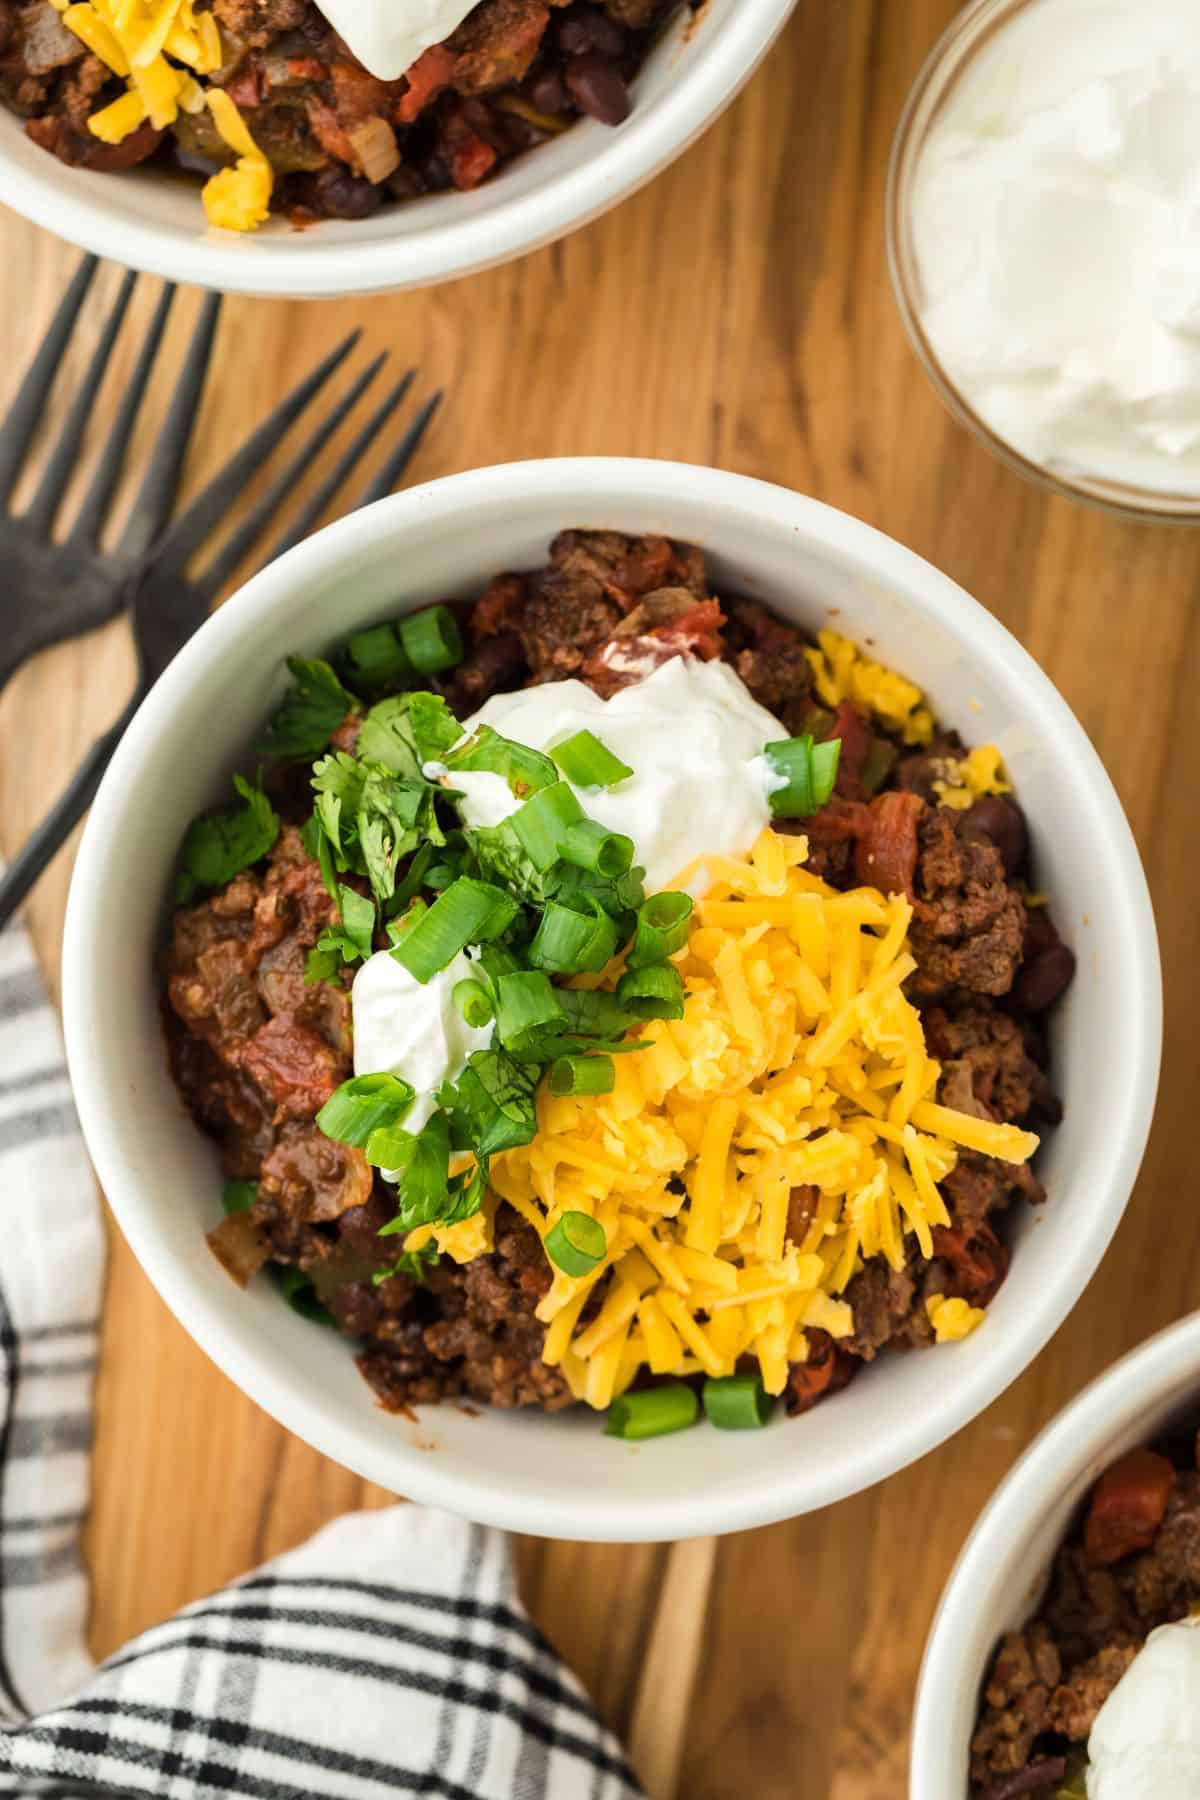 Overhead shot of a bowl of chili garnished with shredded cheese, sour cream and chopped green onions, with two forks, a small bowl of sour cream and more bowls of chili next to it